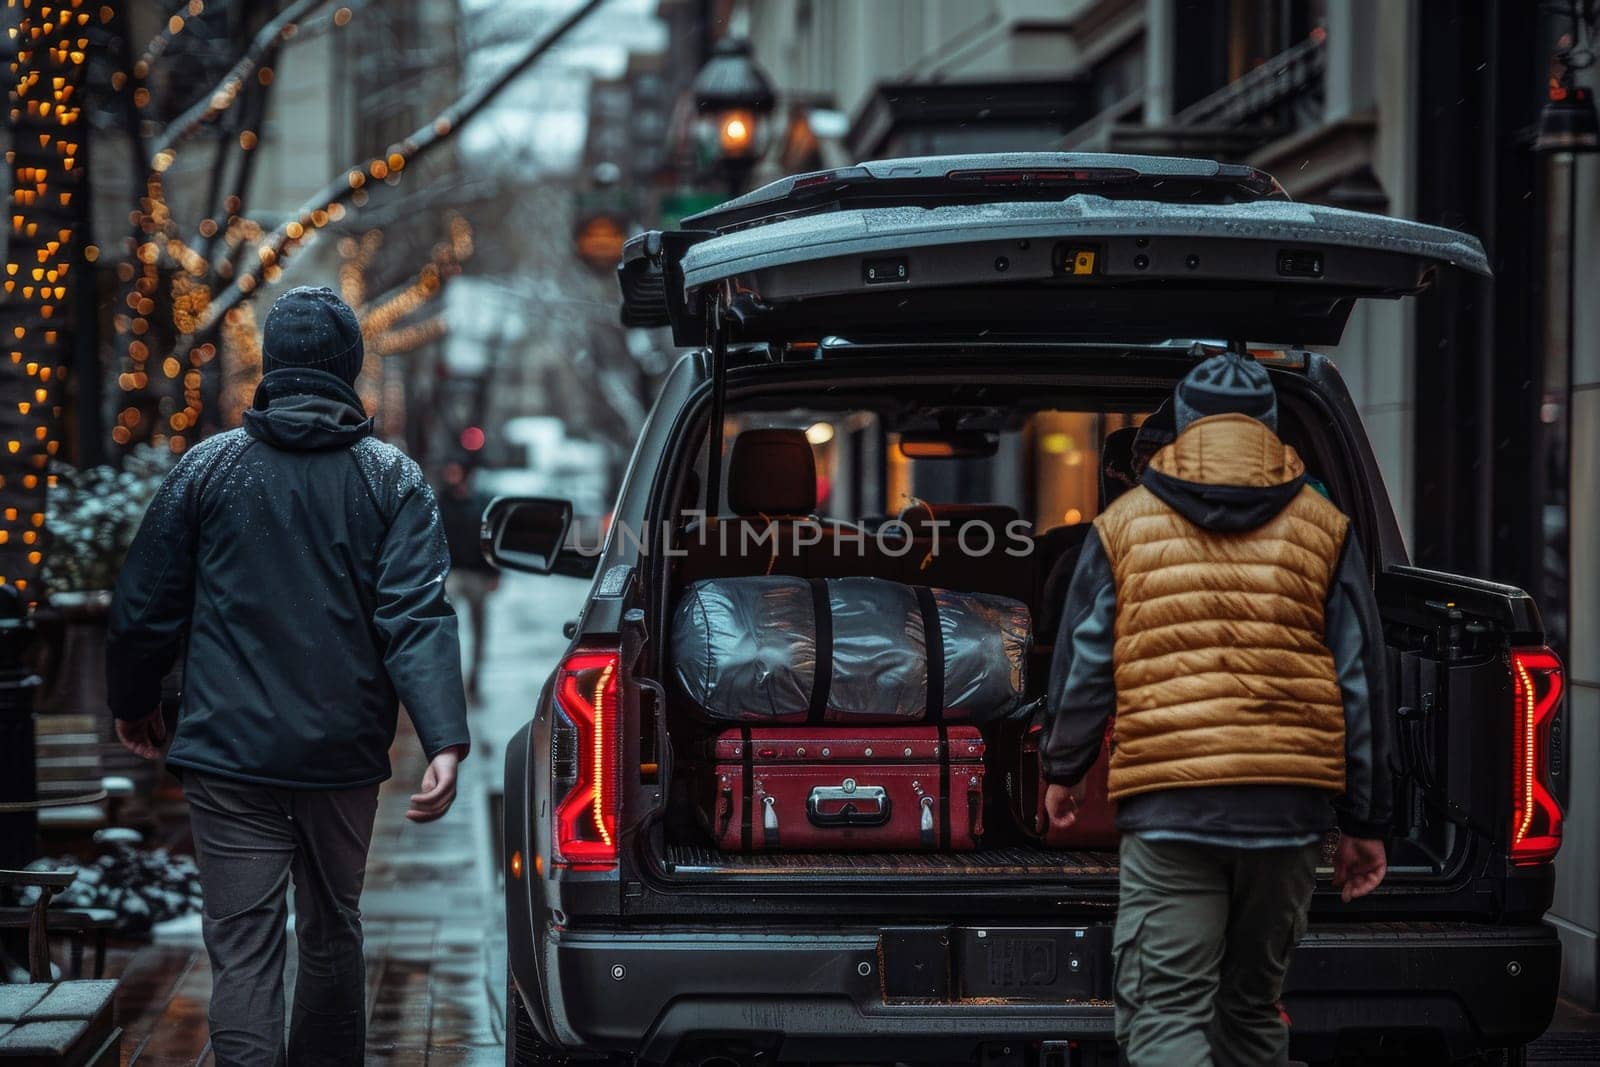 Two men are walking out of a truck with luggage. The truck is parked on a wet street